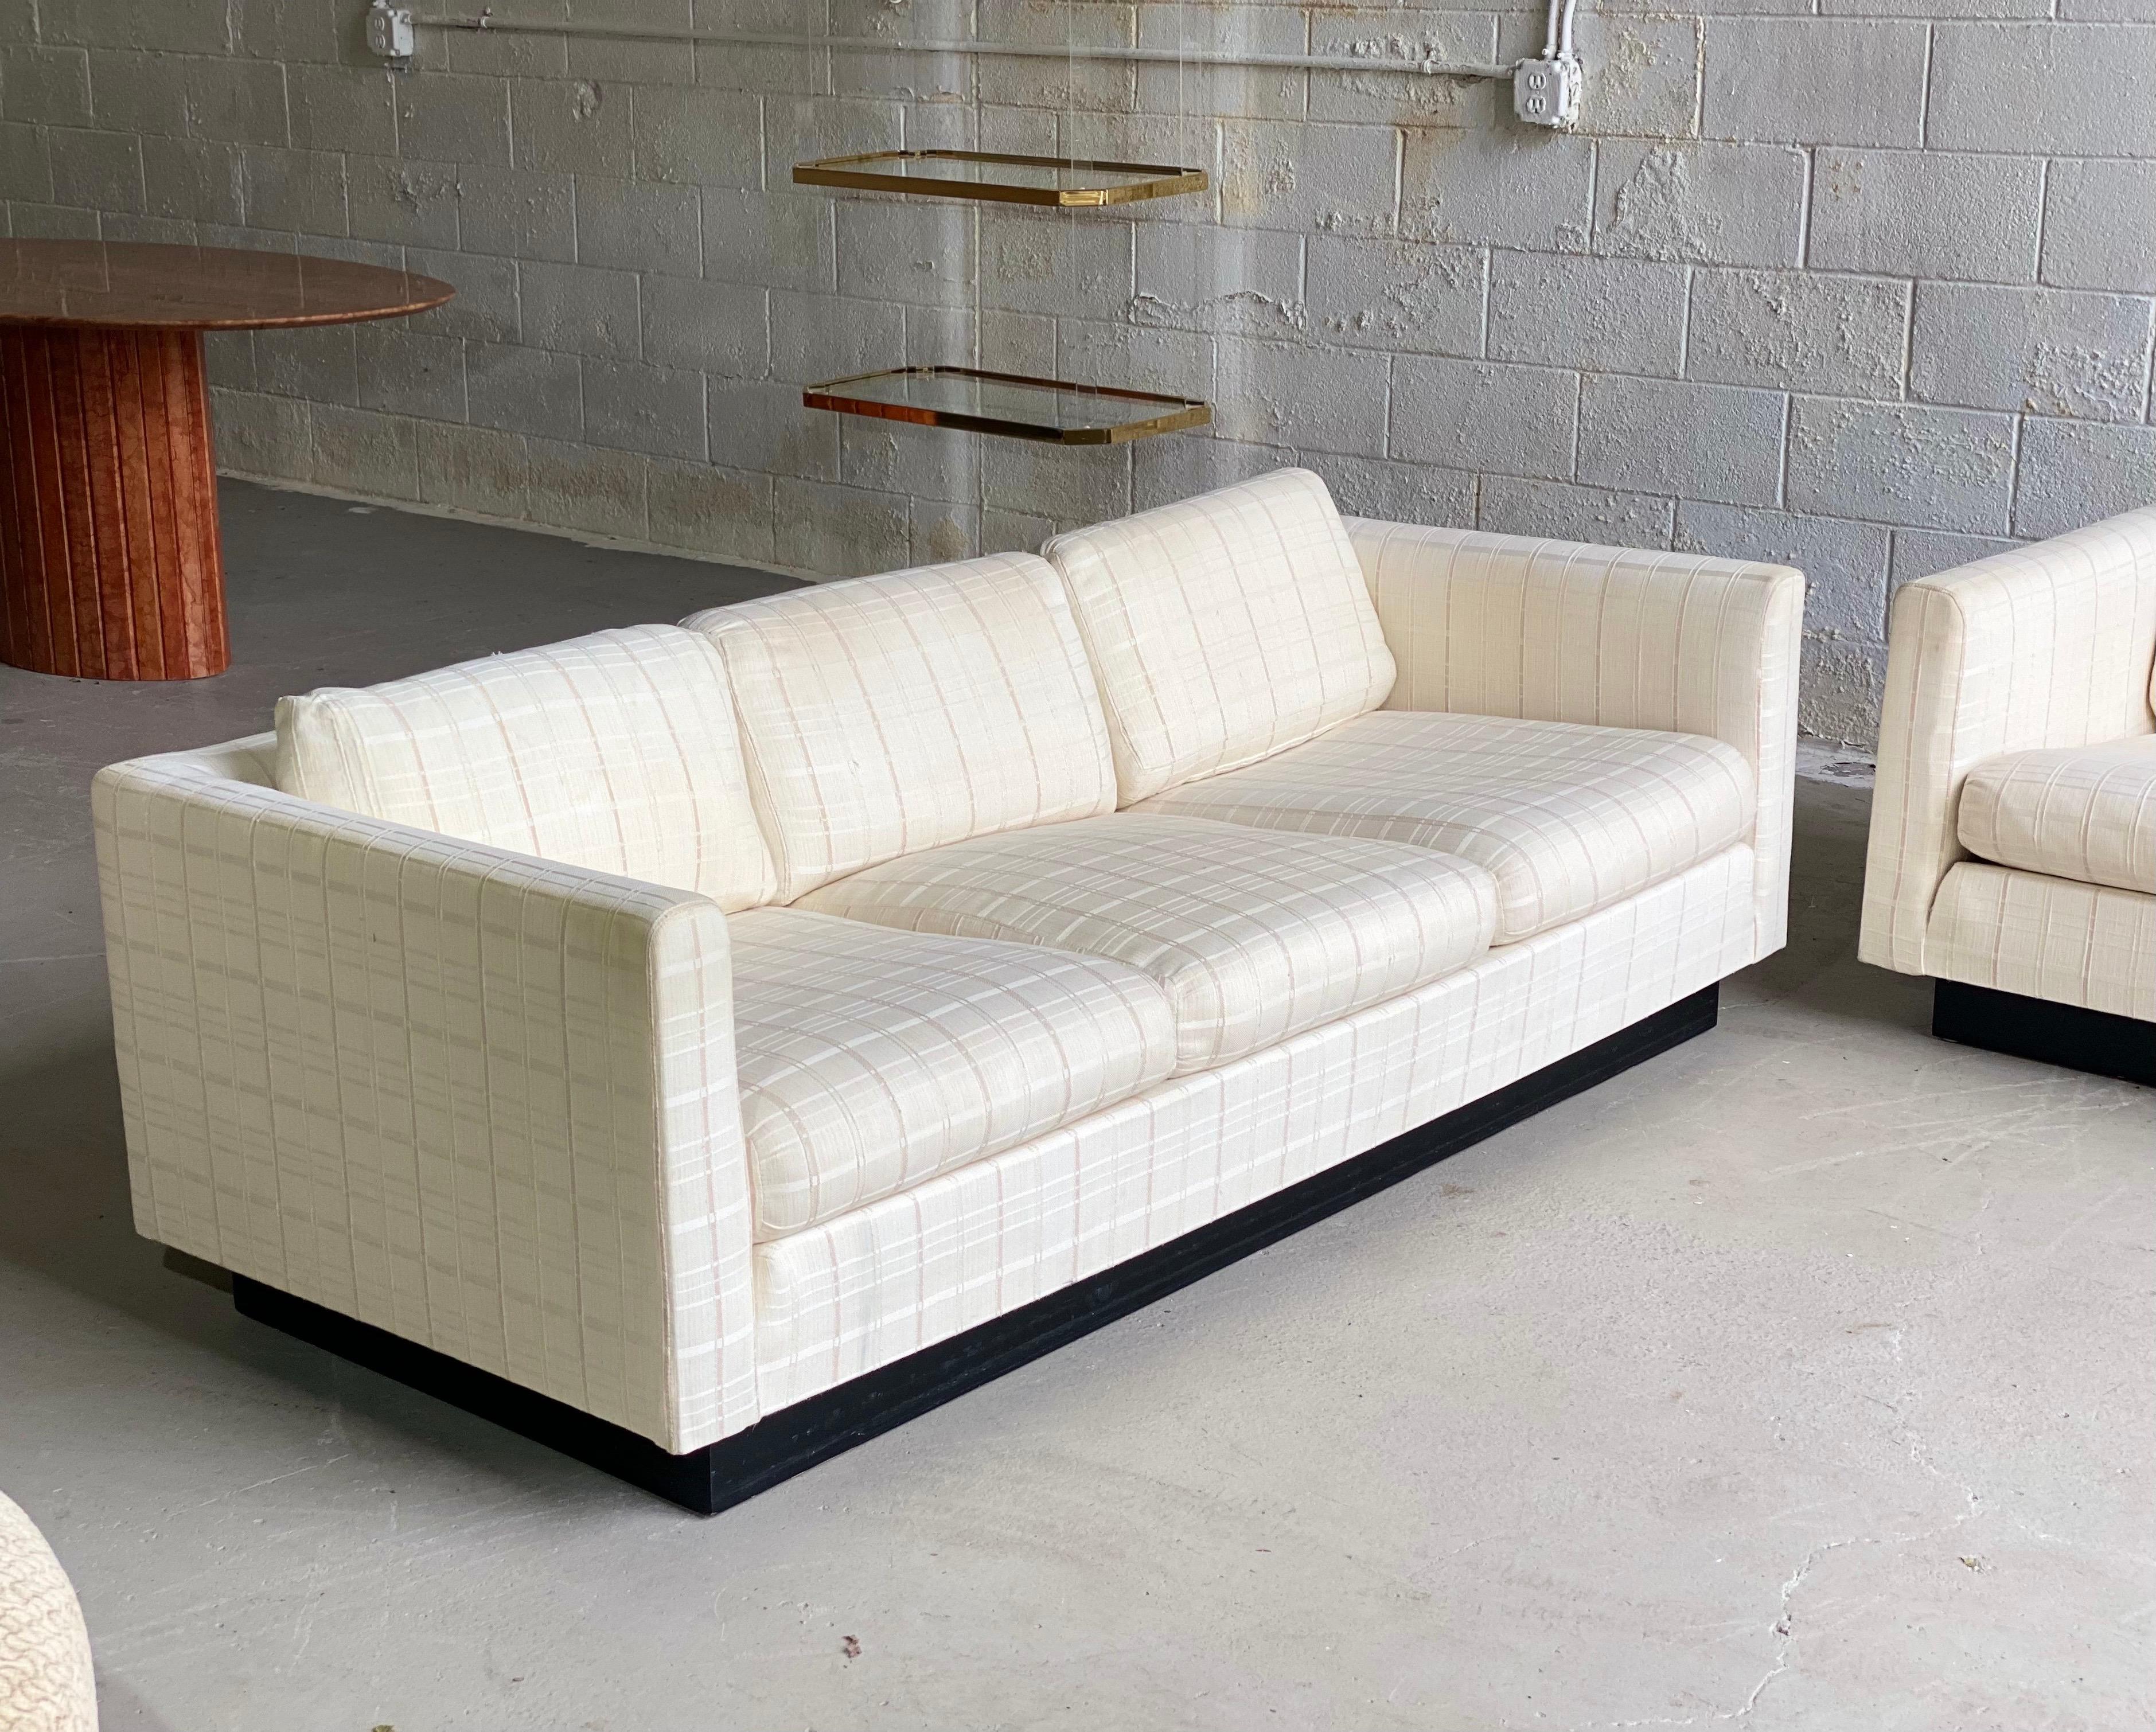 We are very pleased to offer a pair of super chic, tuxedo sofas designed by Milo Baughman for Thayer Coggin, circa the 1980s. This set showcases a wraparound frame upholstered in a beautiful neutral linen fabric supported by a black plinth base.